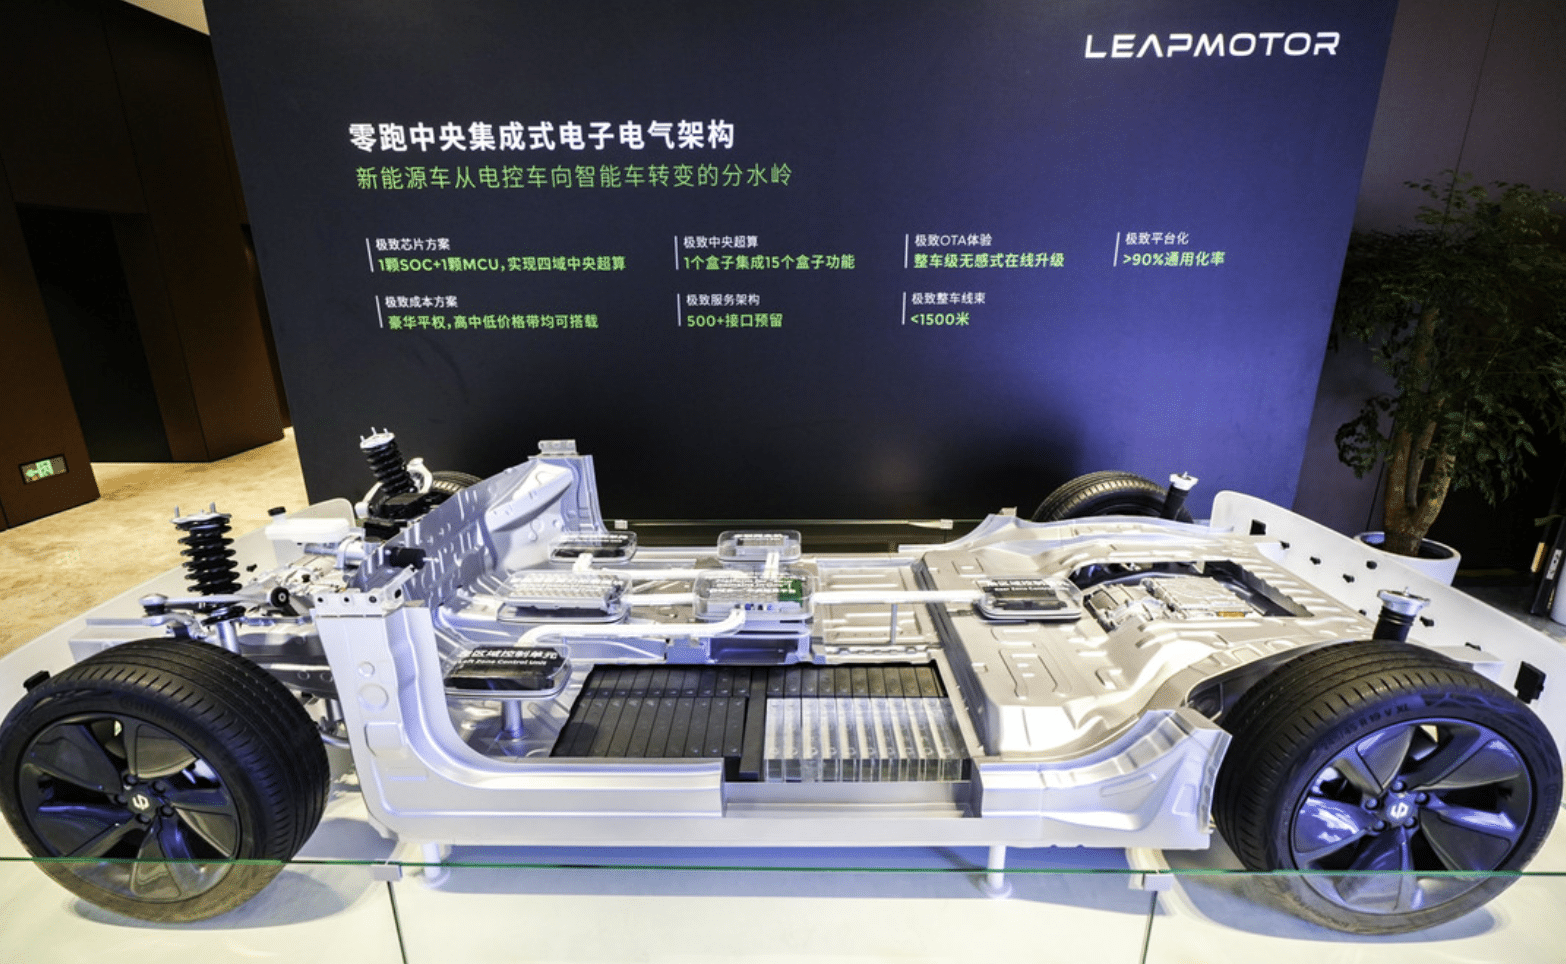 VW Jetta to buy Leap Motor’s tech to enter Chinese EV segment: unnamed insider